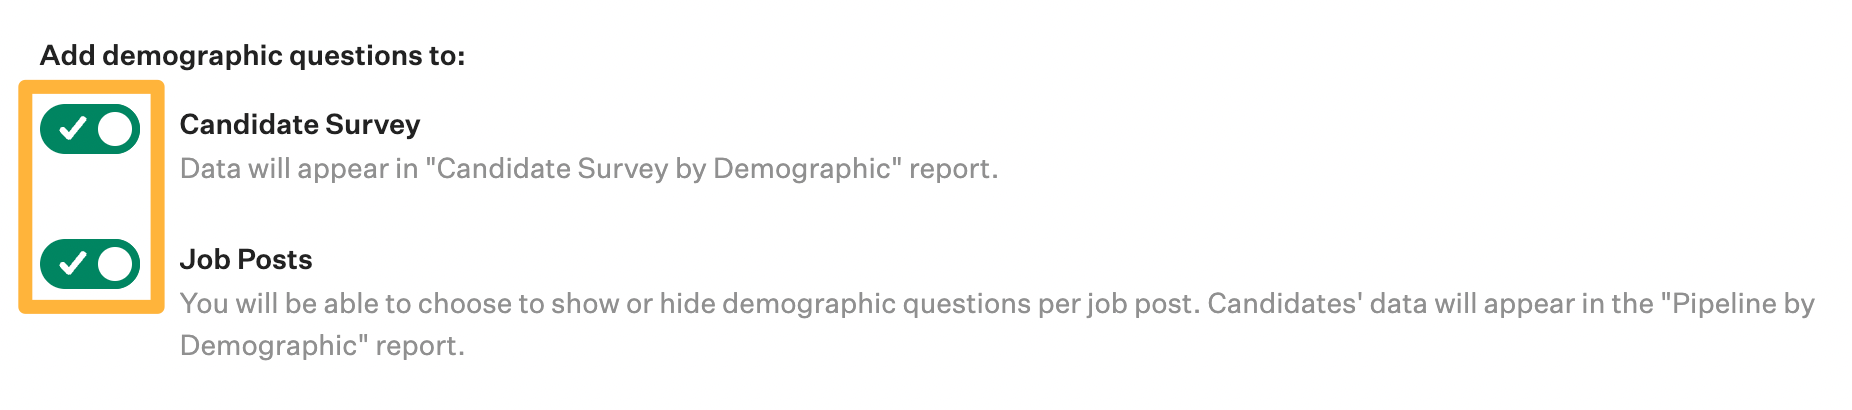 Screenshot-of-the-add-demographic-questions-to-section.png